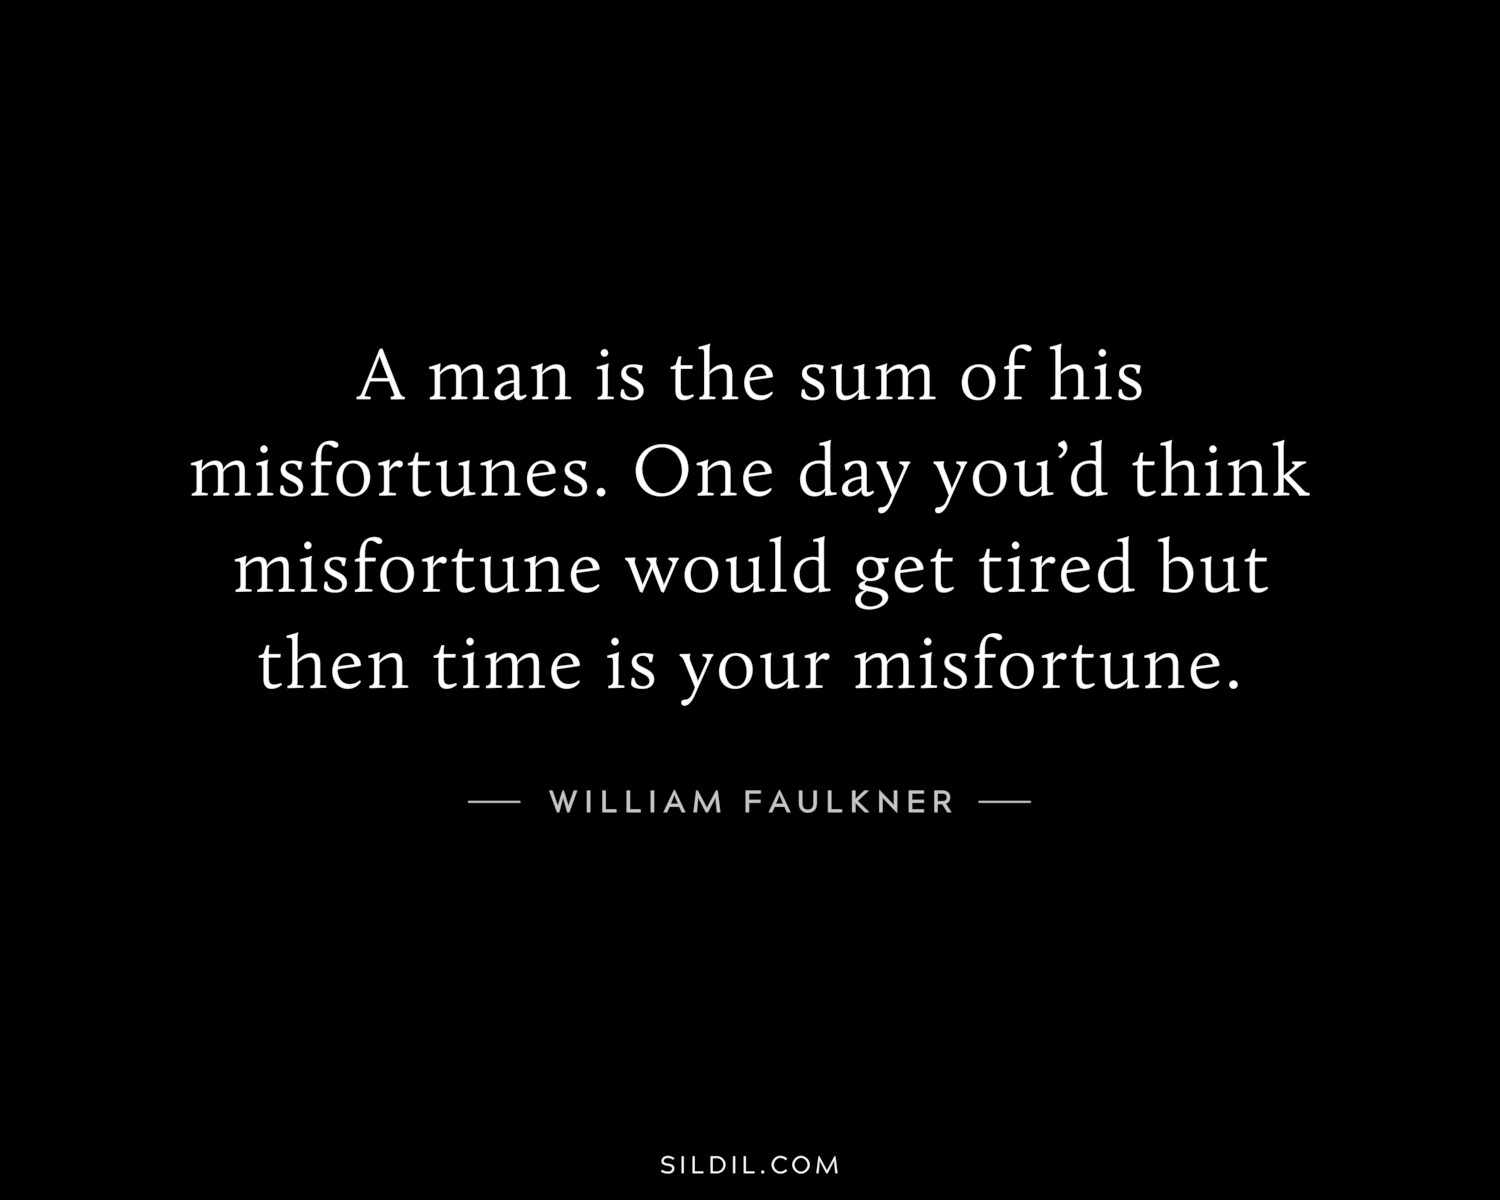 A man is the sum of his misfortunes. One day you’d think misfortune would get tired but then time is your misfortune.